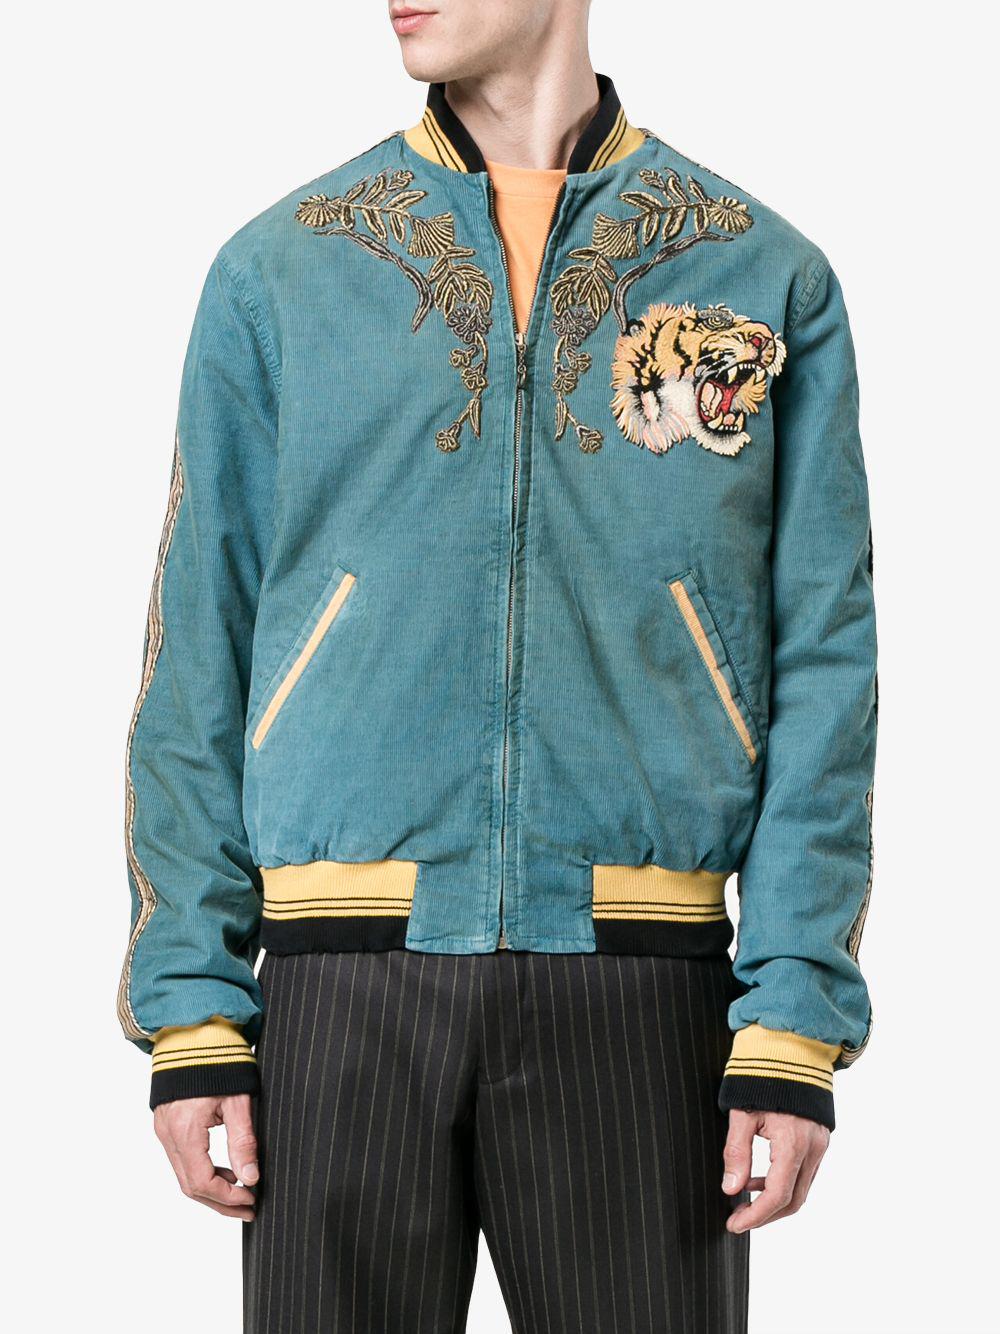 Gucci Love Life Is Gucci Lightweight Coat Casual Bomber Jacket - Tagotee